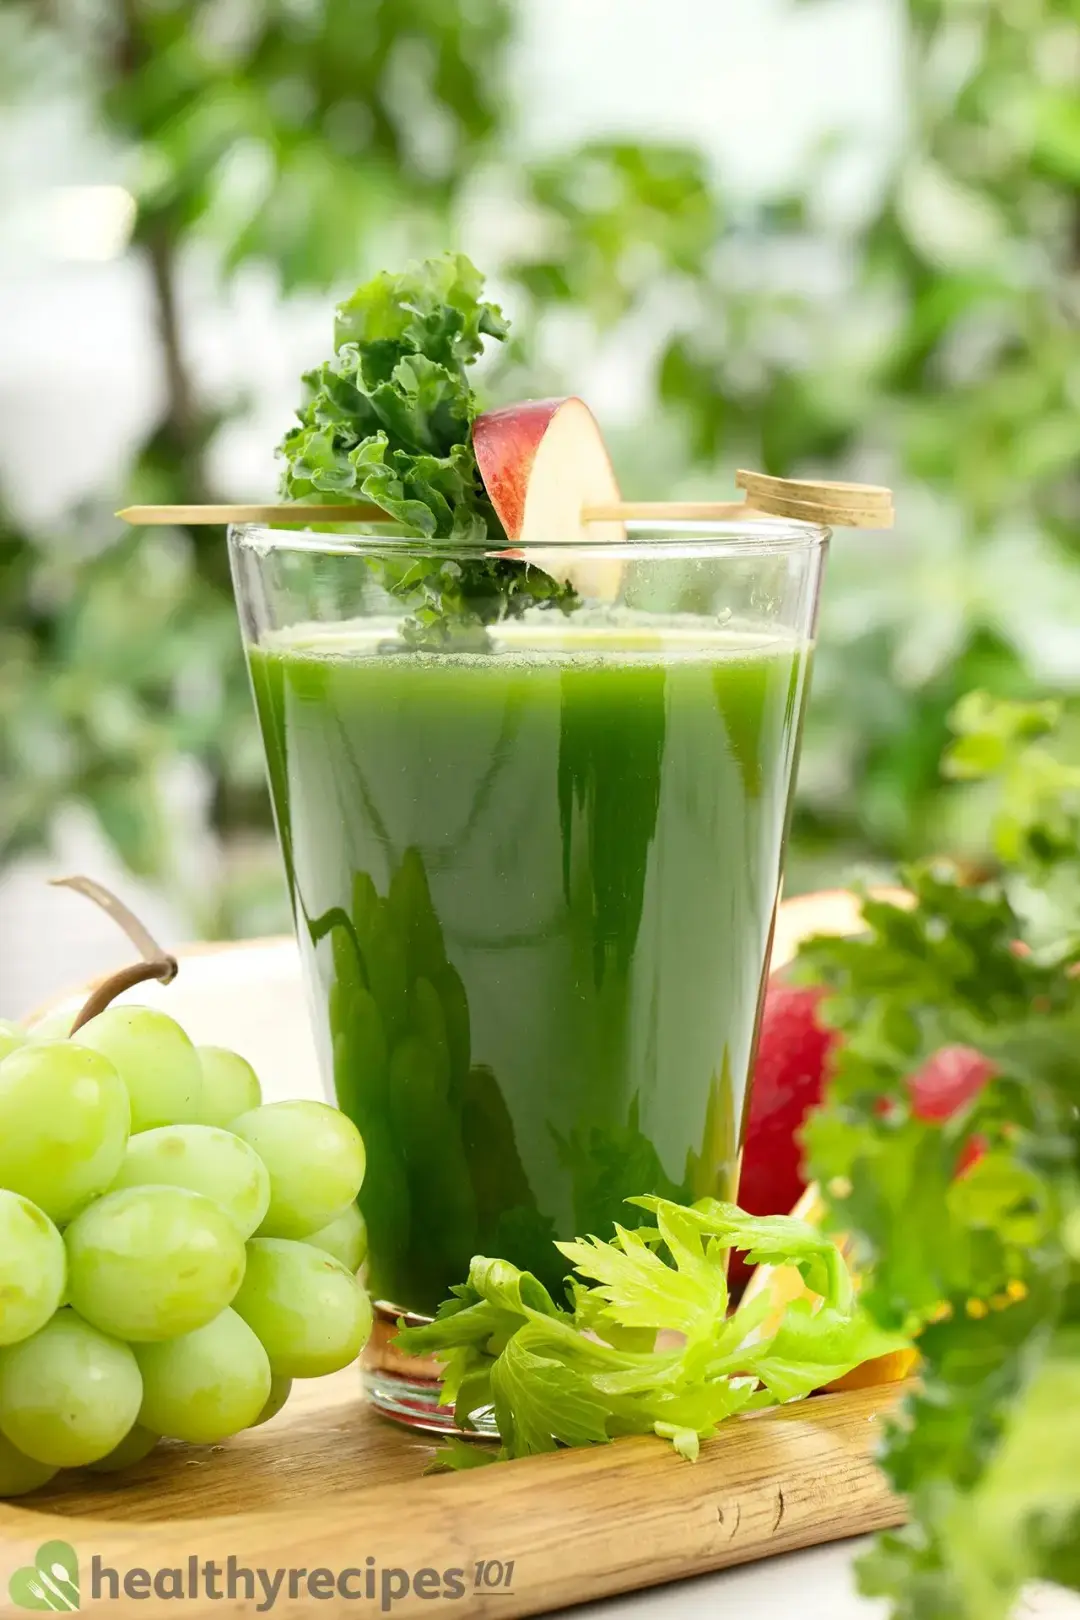 A tall glass of green machine juice on a wooden tray along with some green grapes, celery leaves, and apples